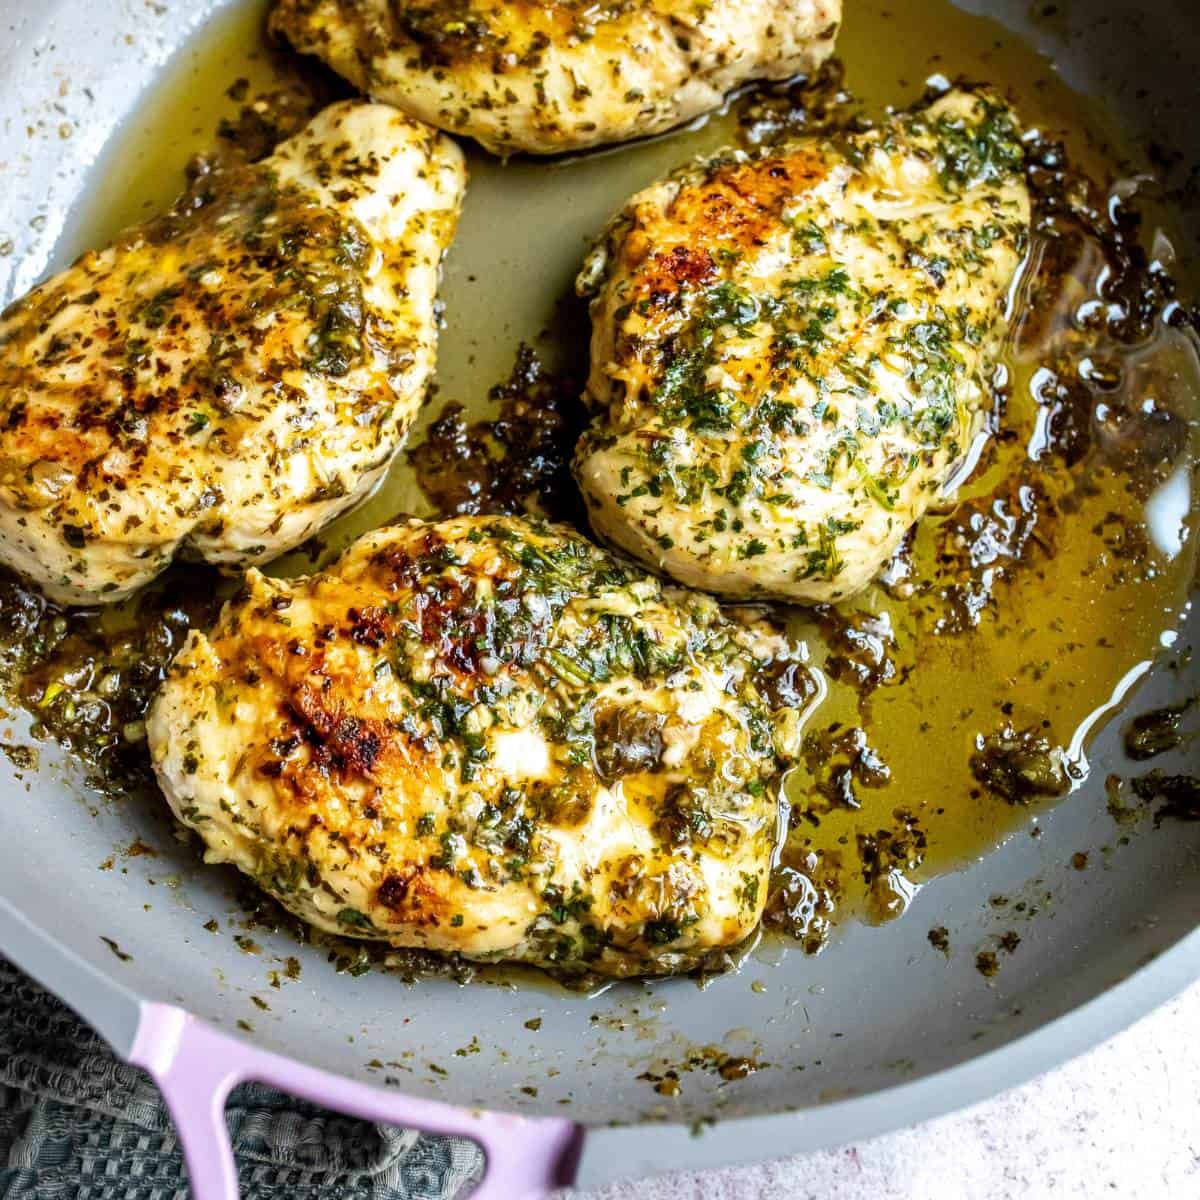 Grey skillet with Cilantro and Lime Chicken Marinade in it, Lime on the side.